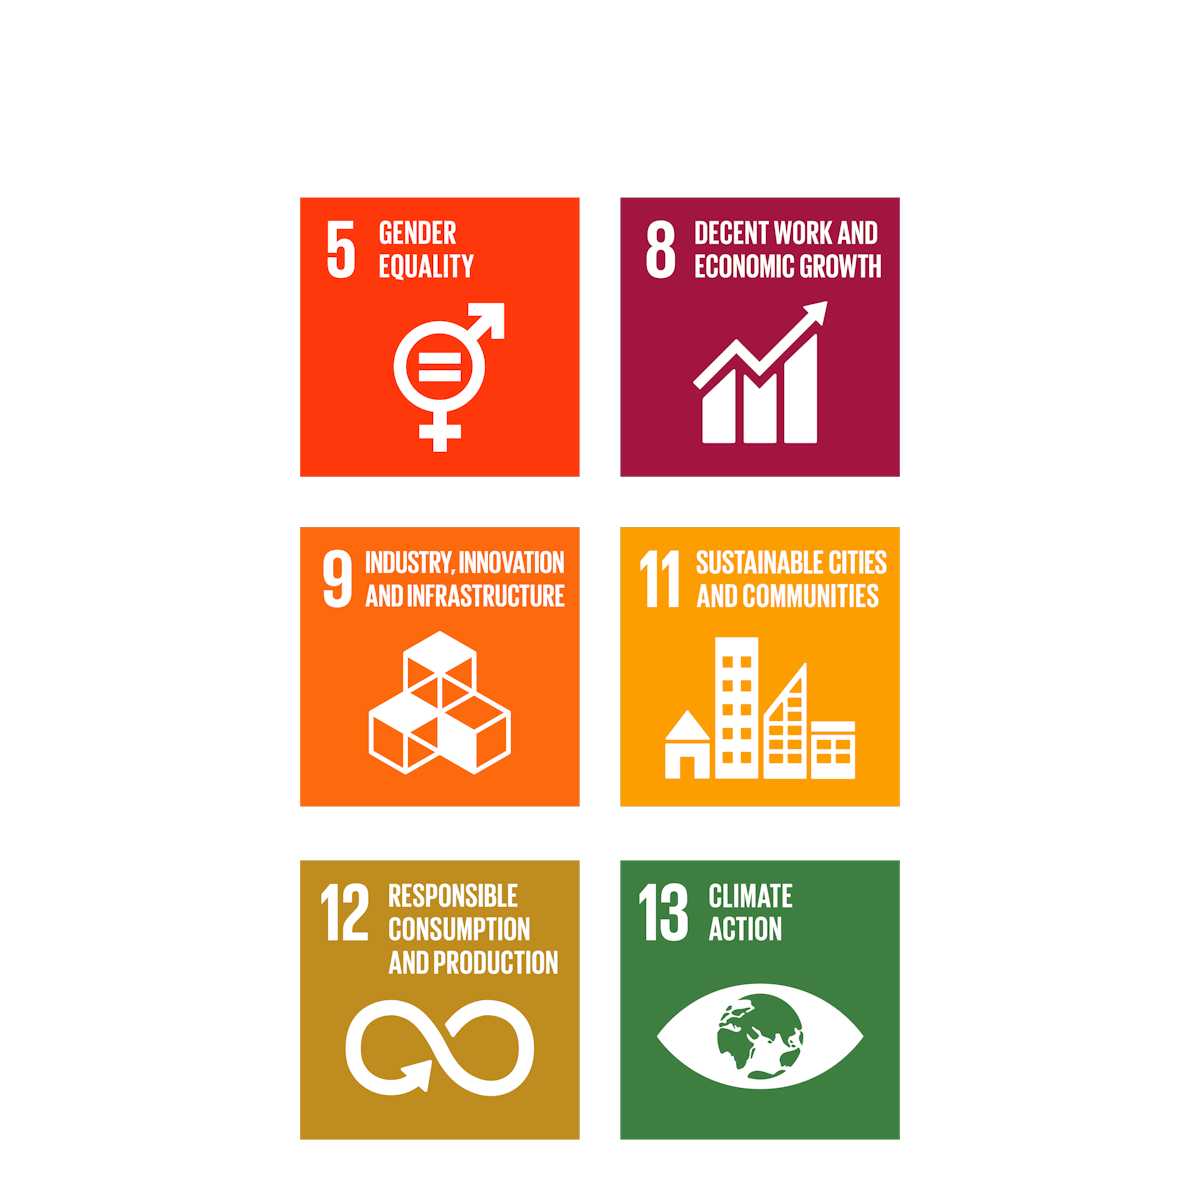 5. Gender equality, 8. Decent work and economic growth, 9. industry, innovation and infrastructure, 11. sustainable cities and communities, 10. responsible consumption and production, 13. climate action